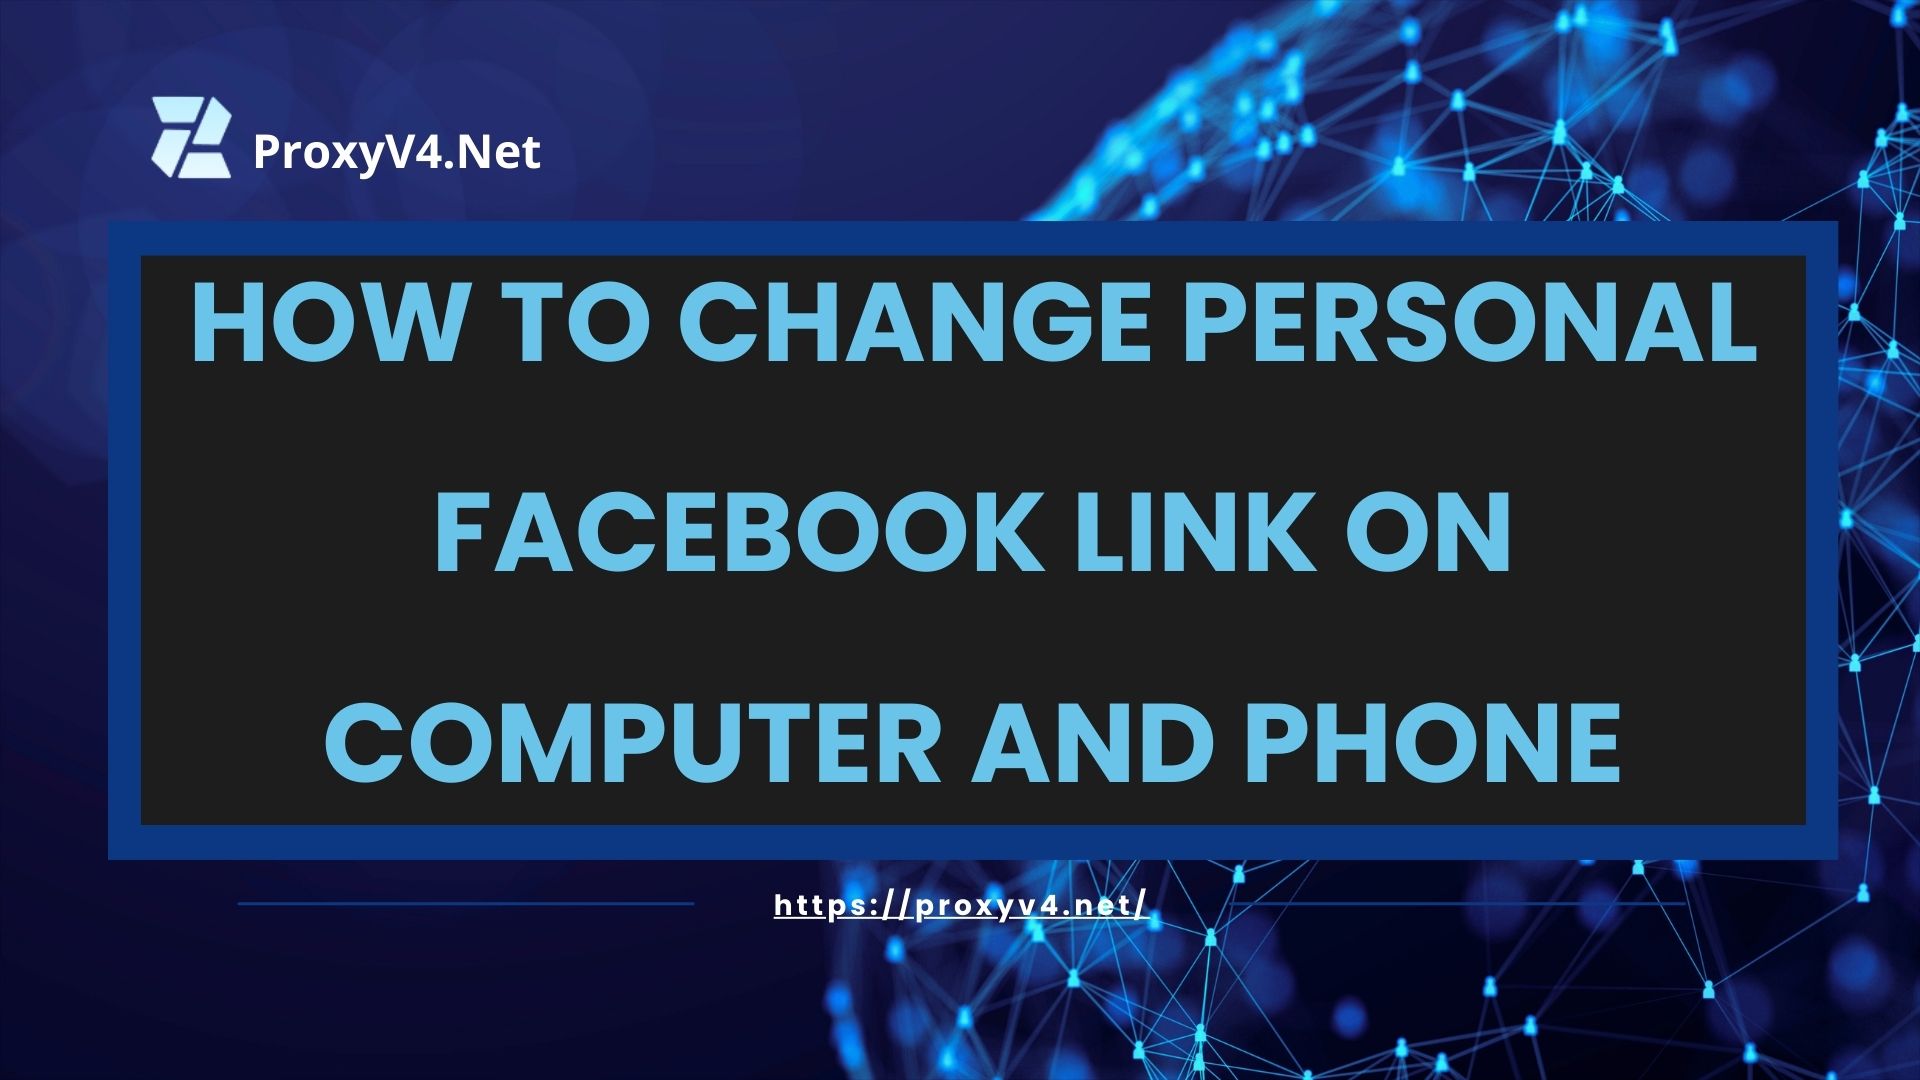 How to change personal Facebook Link on computer and phone